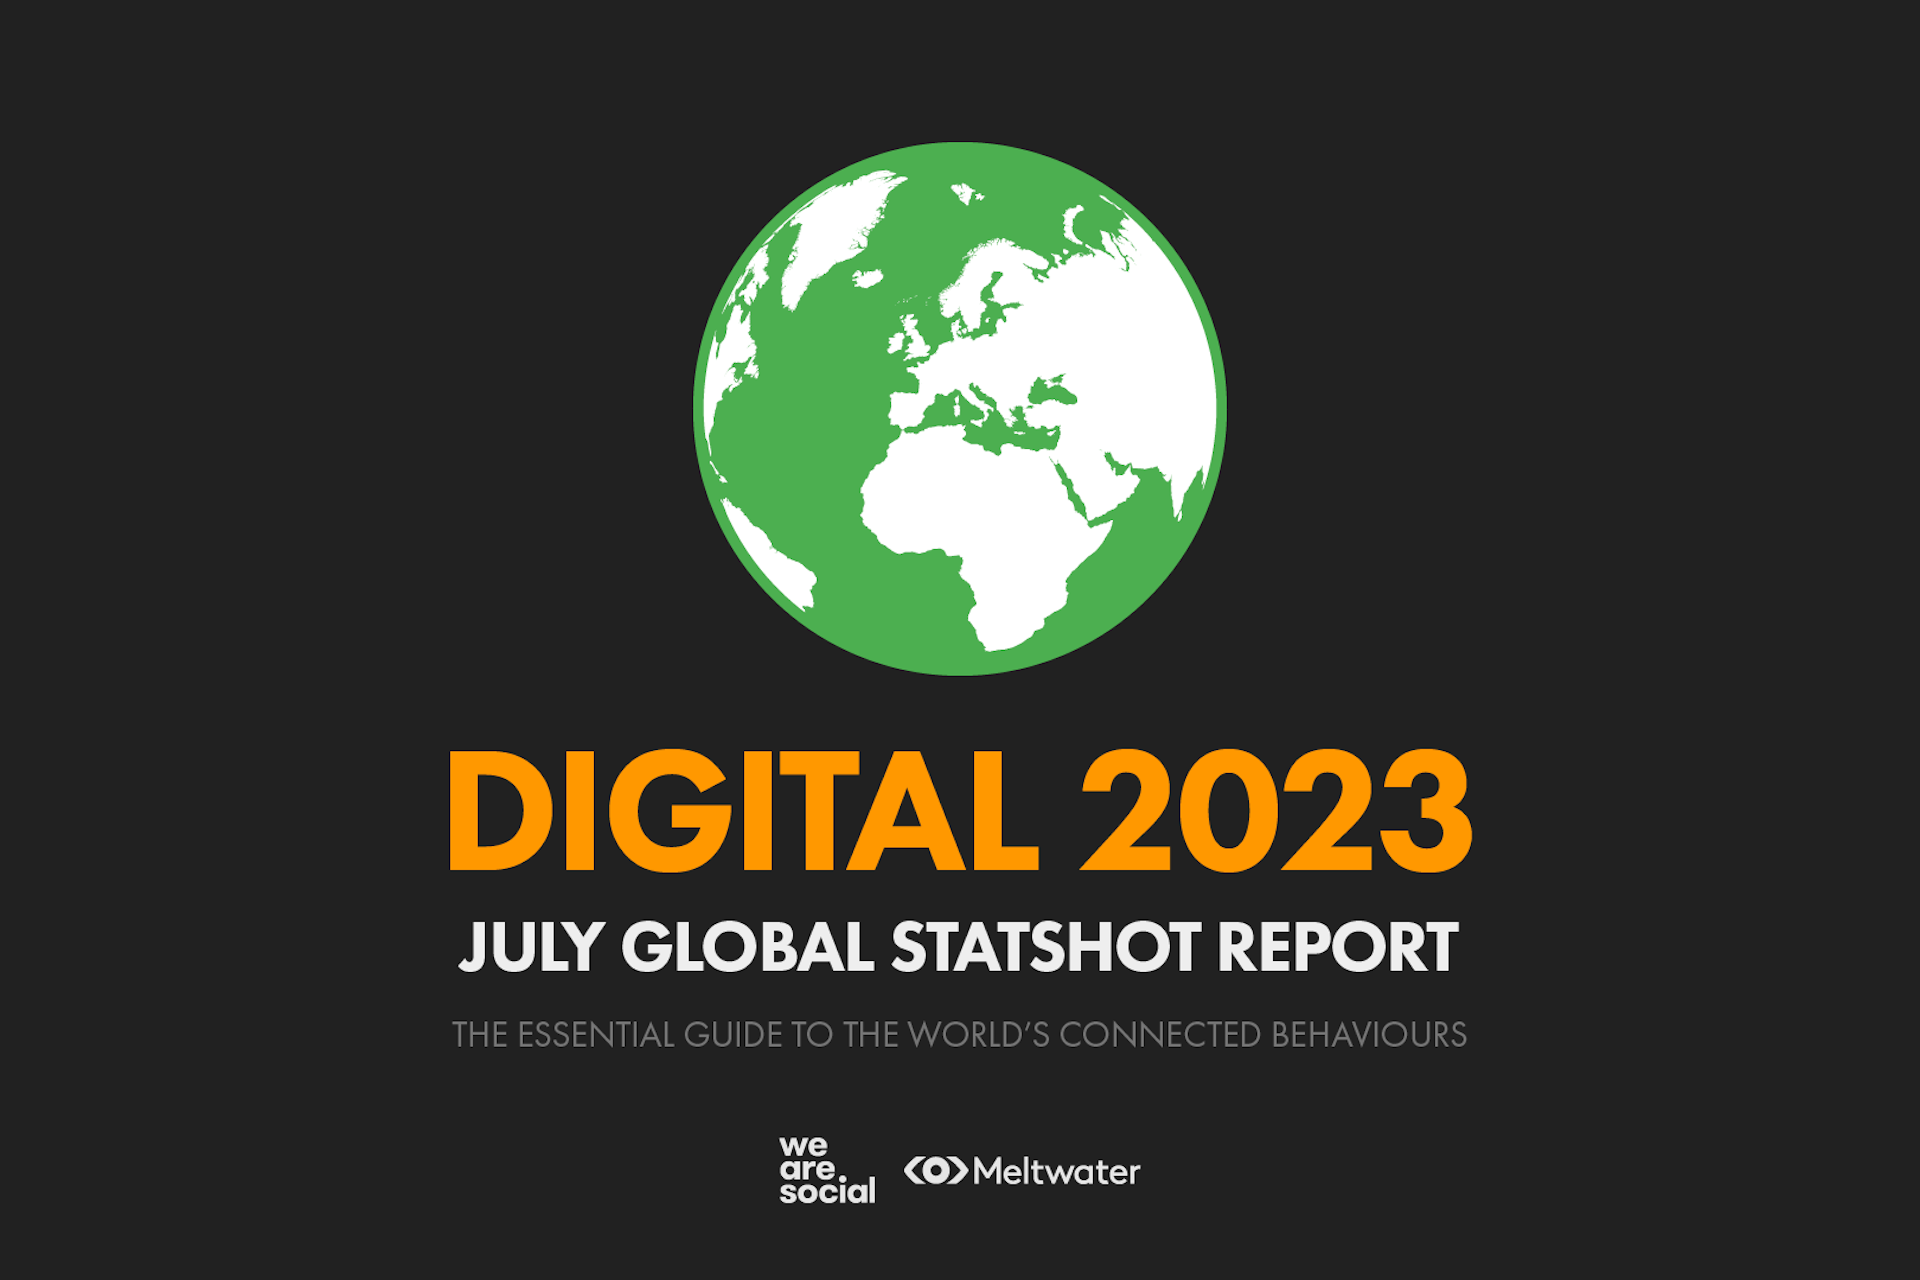 A globe over the words "Digital 2023: July Global Statshot Report, The essential guide to the world's connected behaviours," above the logos for We Are Social and Meltwater